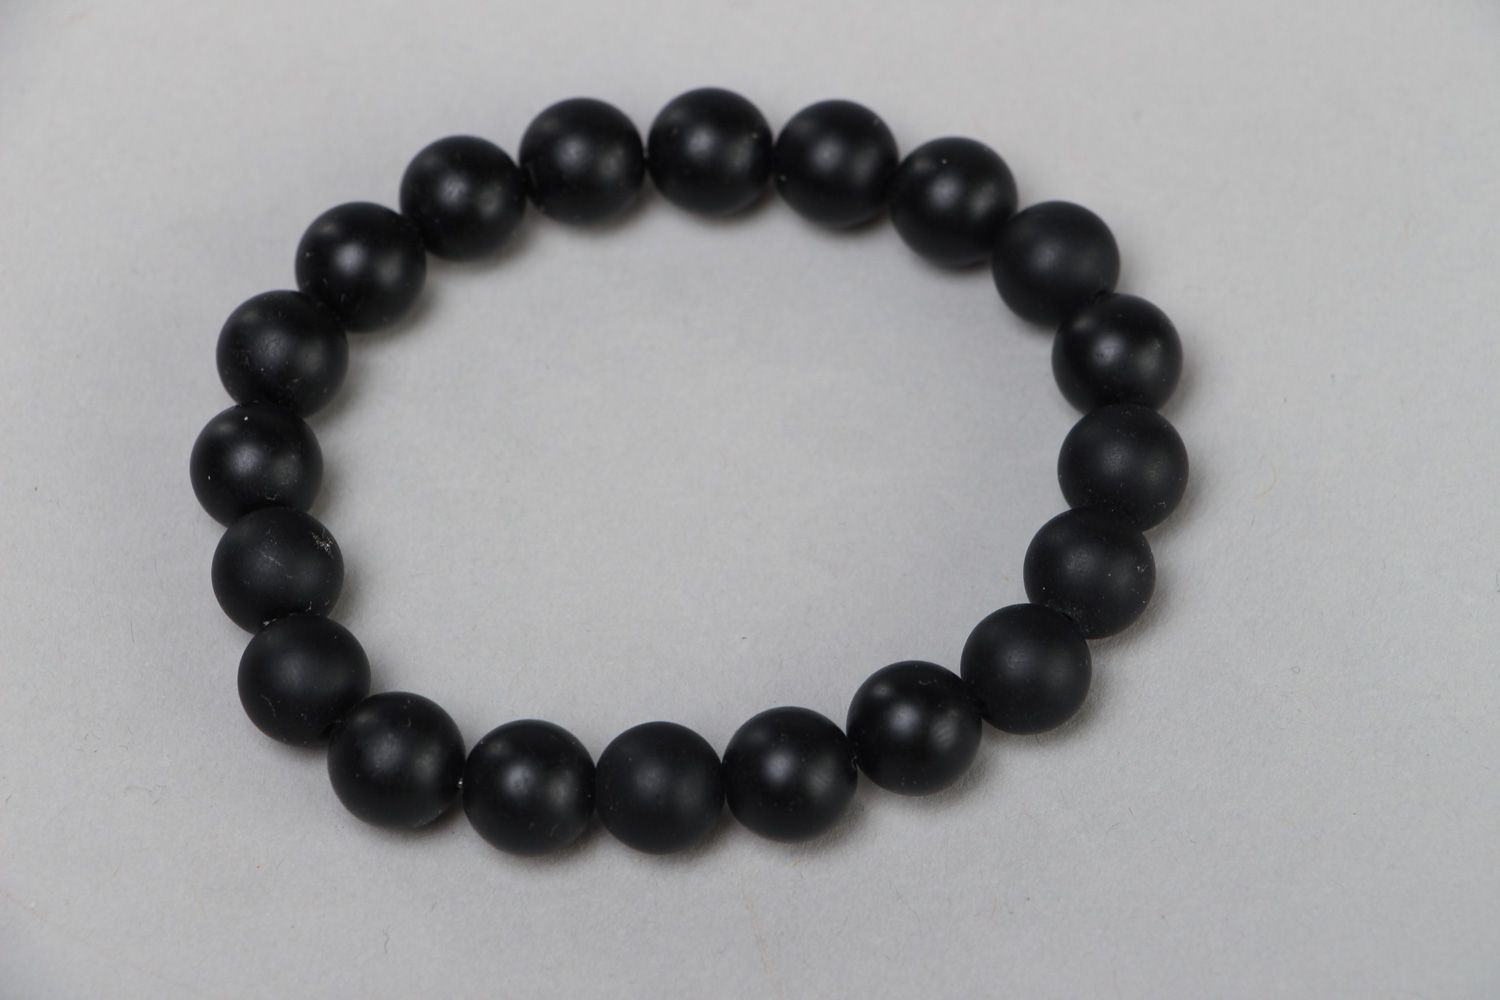 Handmade wrist stretch bracelet with natural stone beads of black color photo 1